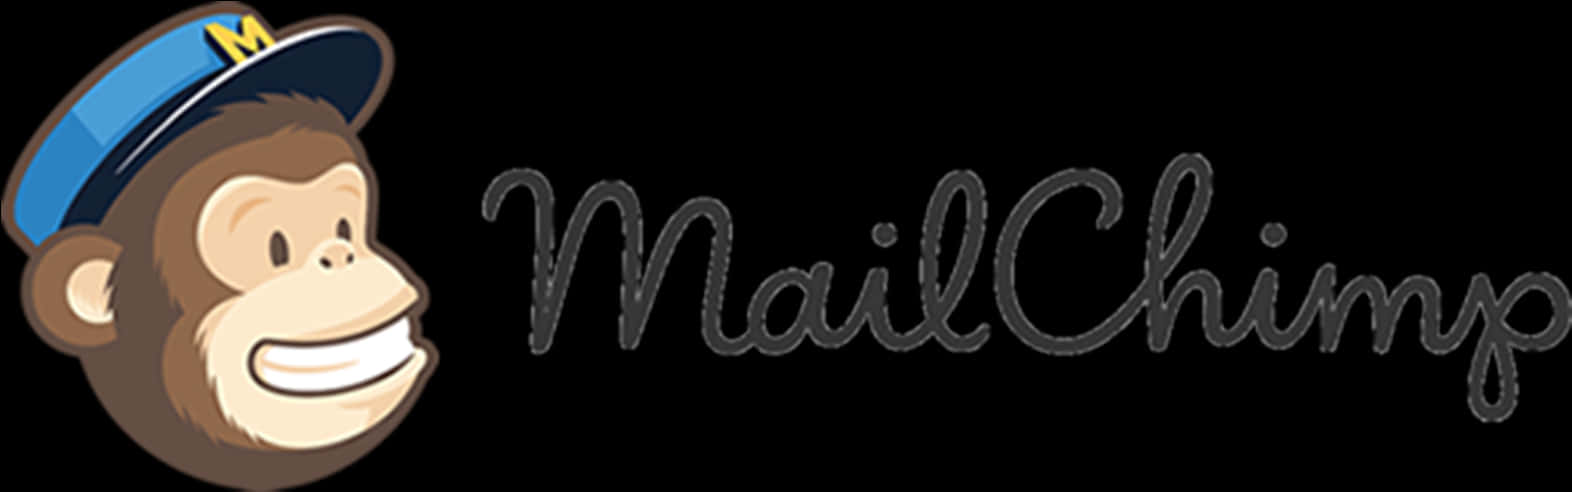 Mailchimp Logowith Monkey Mascot PNG